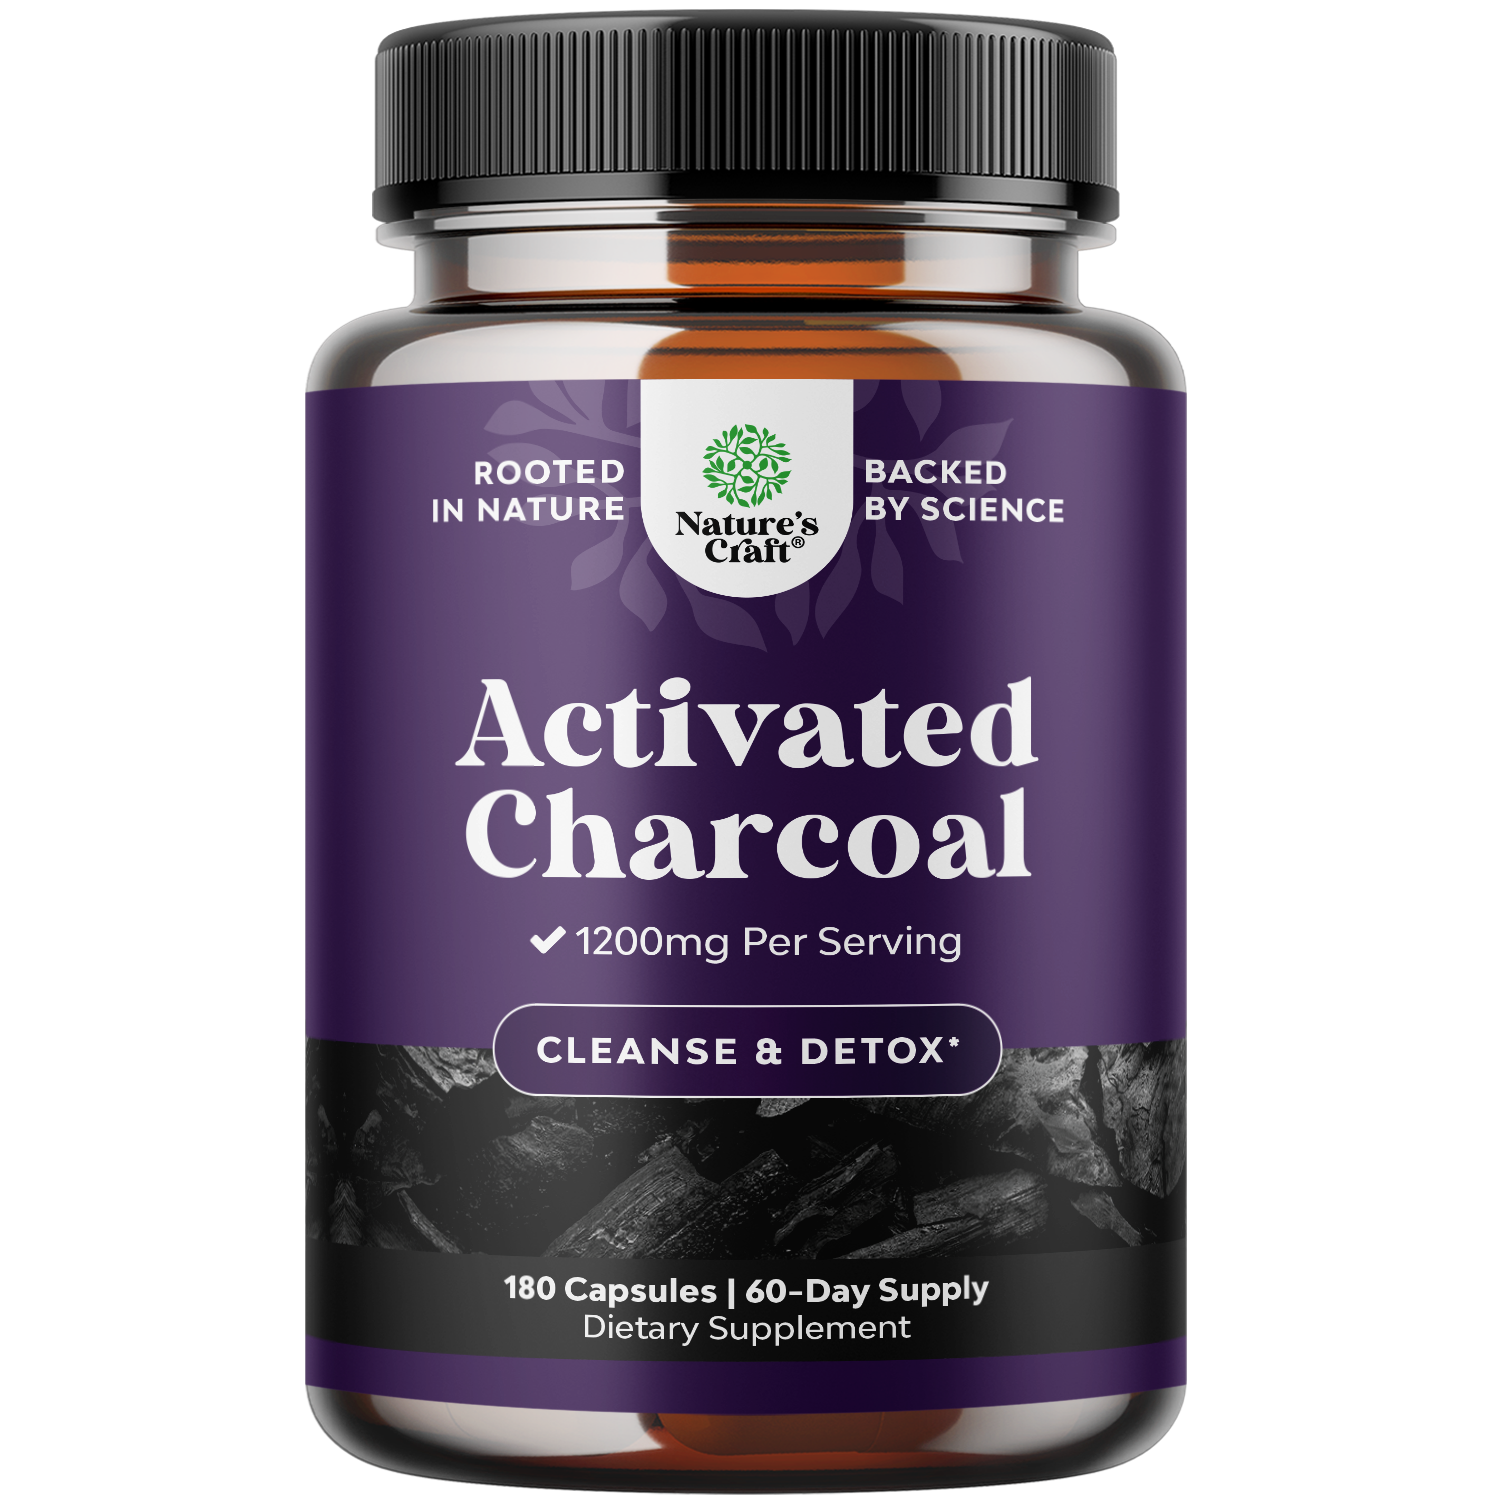 Activated Charcoal 1200mg per serving - 180 Capsules